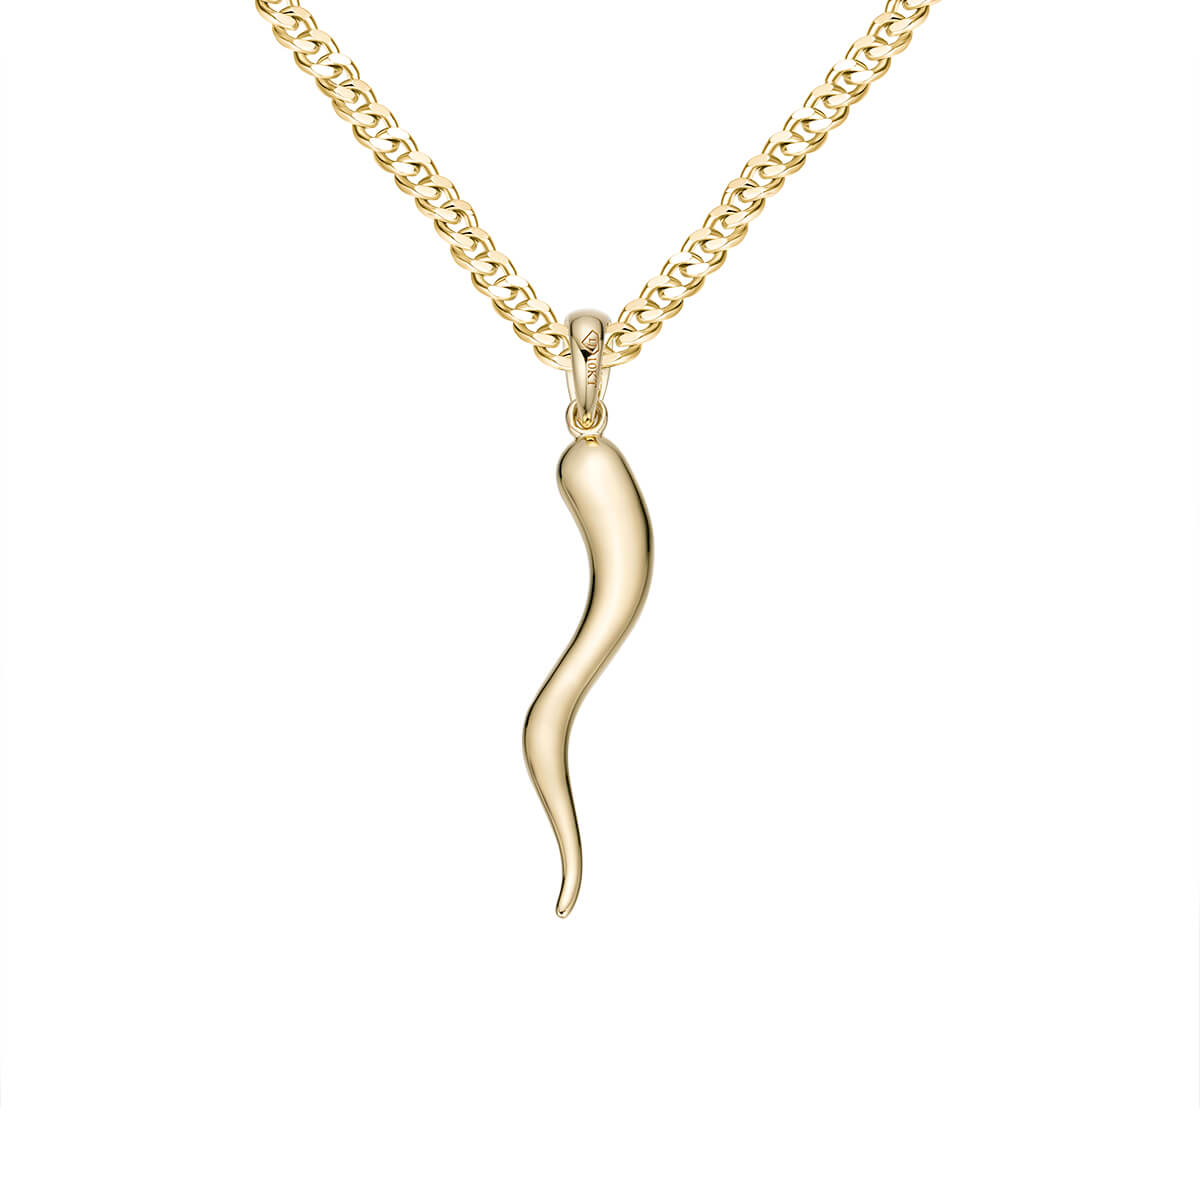 14K Yellow Gold Cornicello Italian Horn Necklace Good Luck Charm Pendant  with 1.9mm Figaro 3+1 Chain - 16